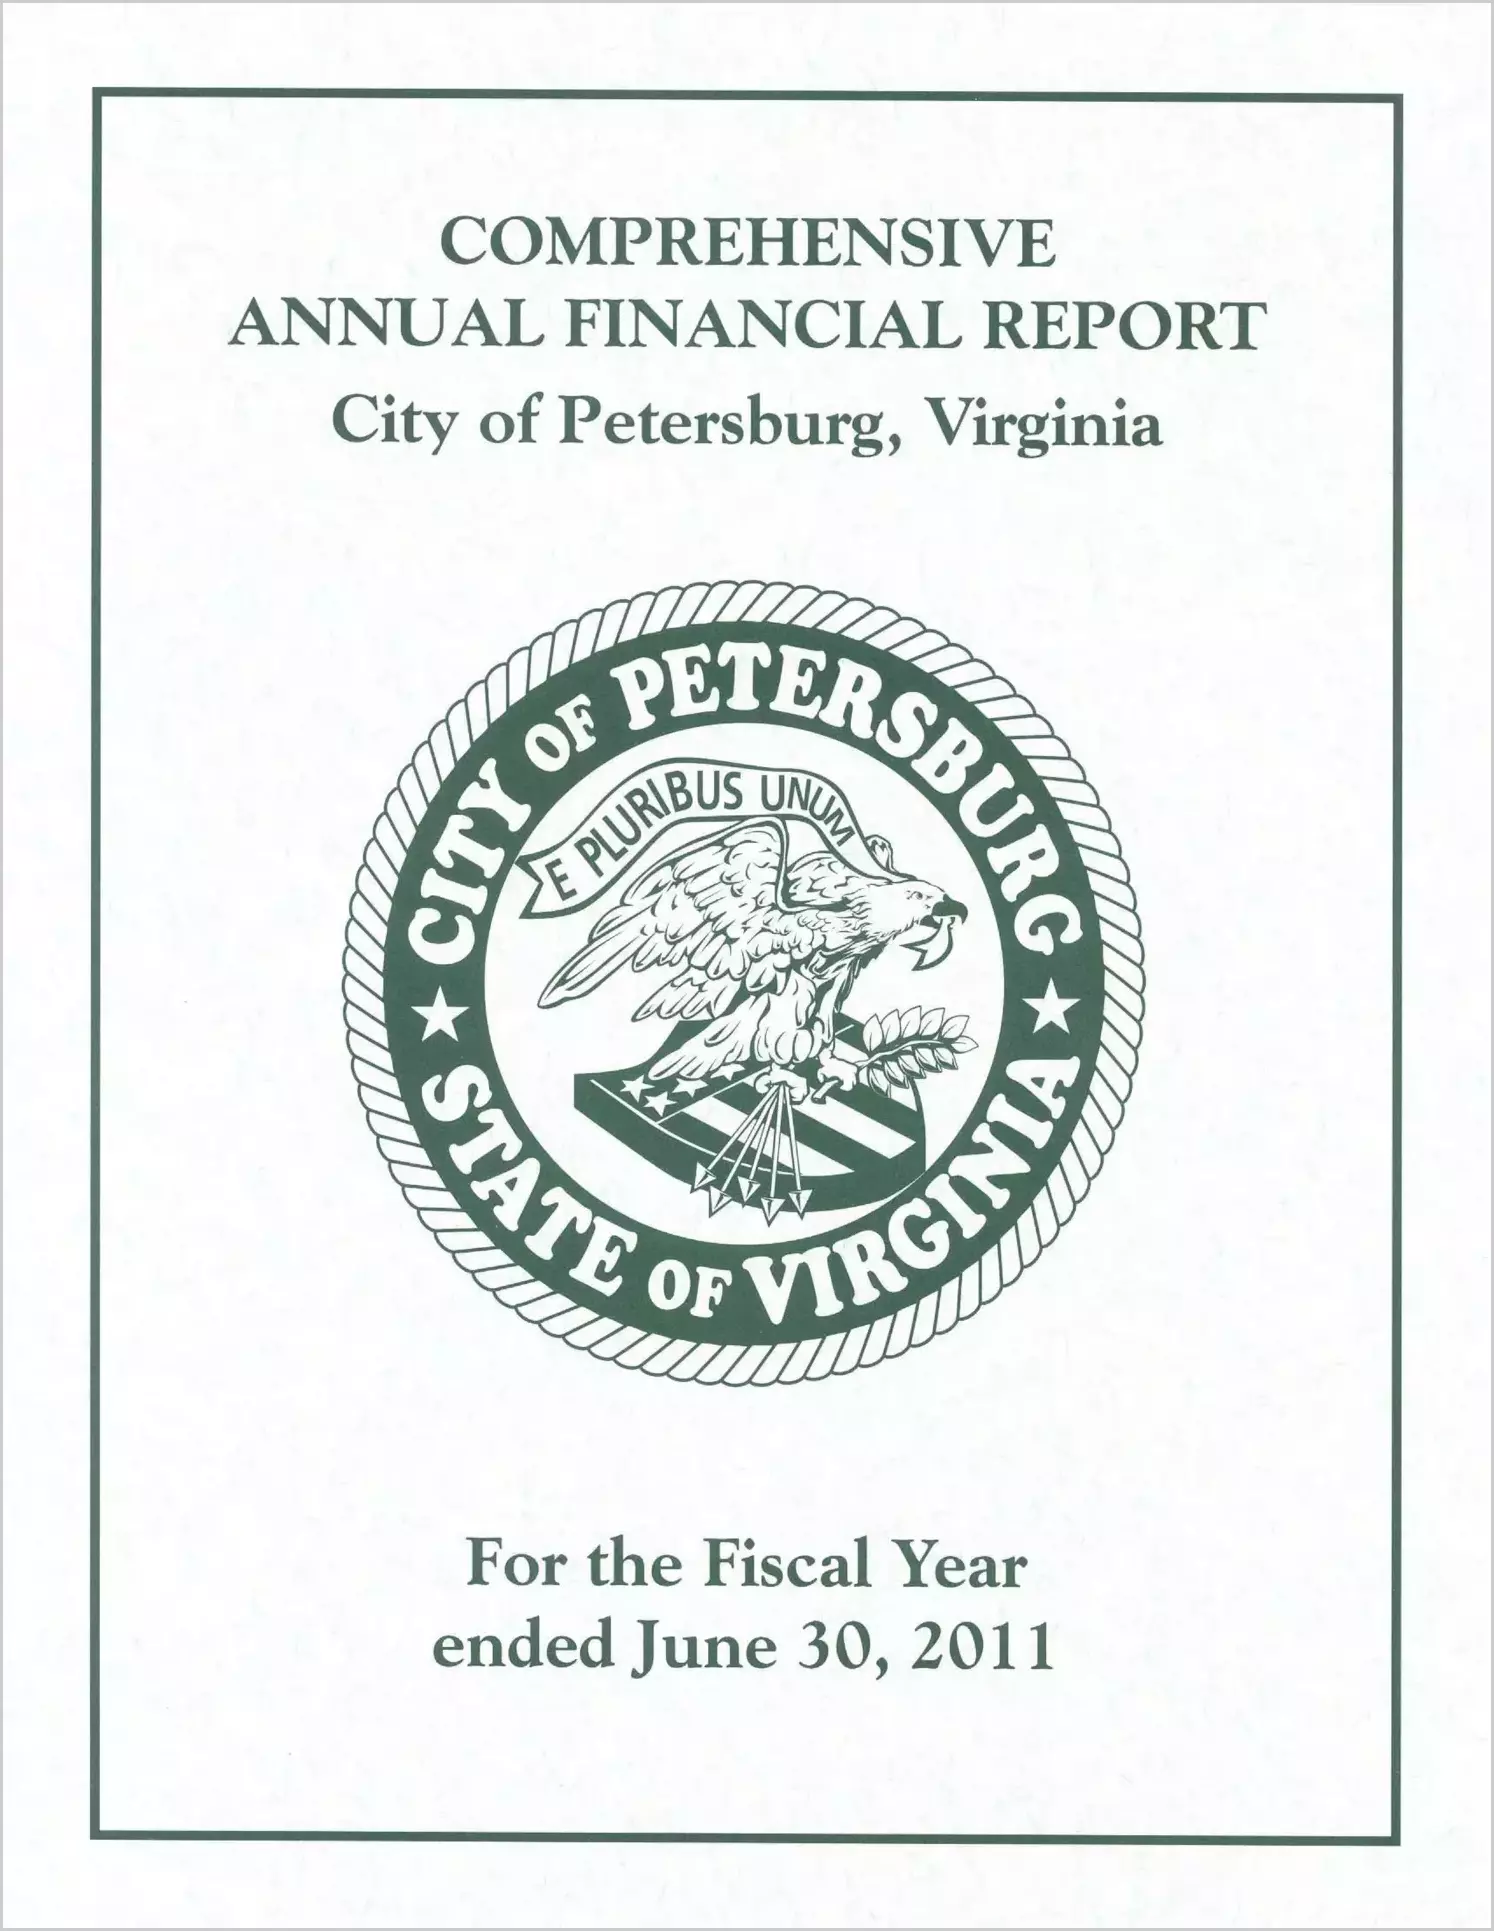 2011 Annual Financial Report for City of Petersburg